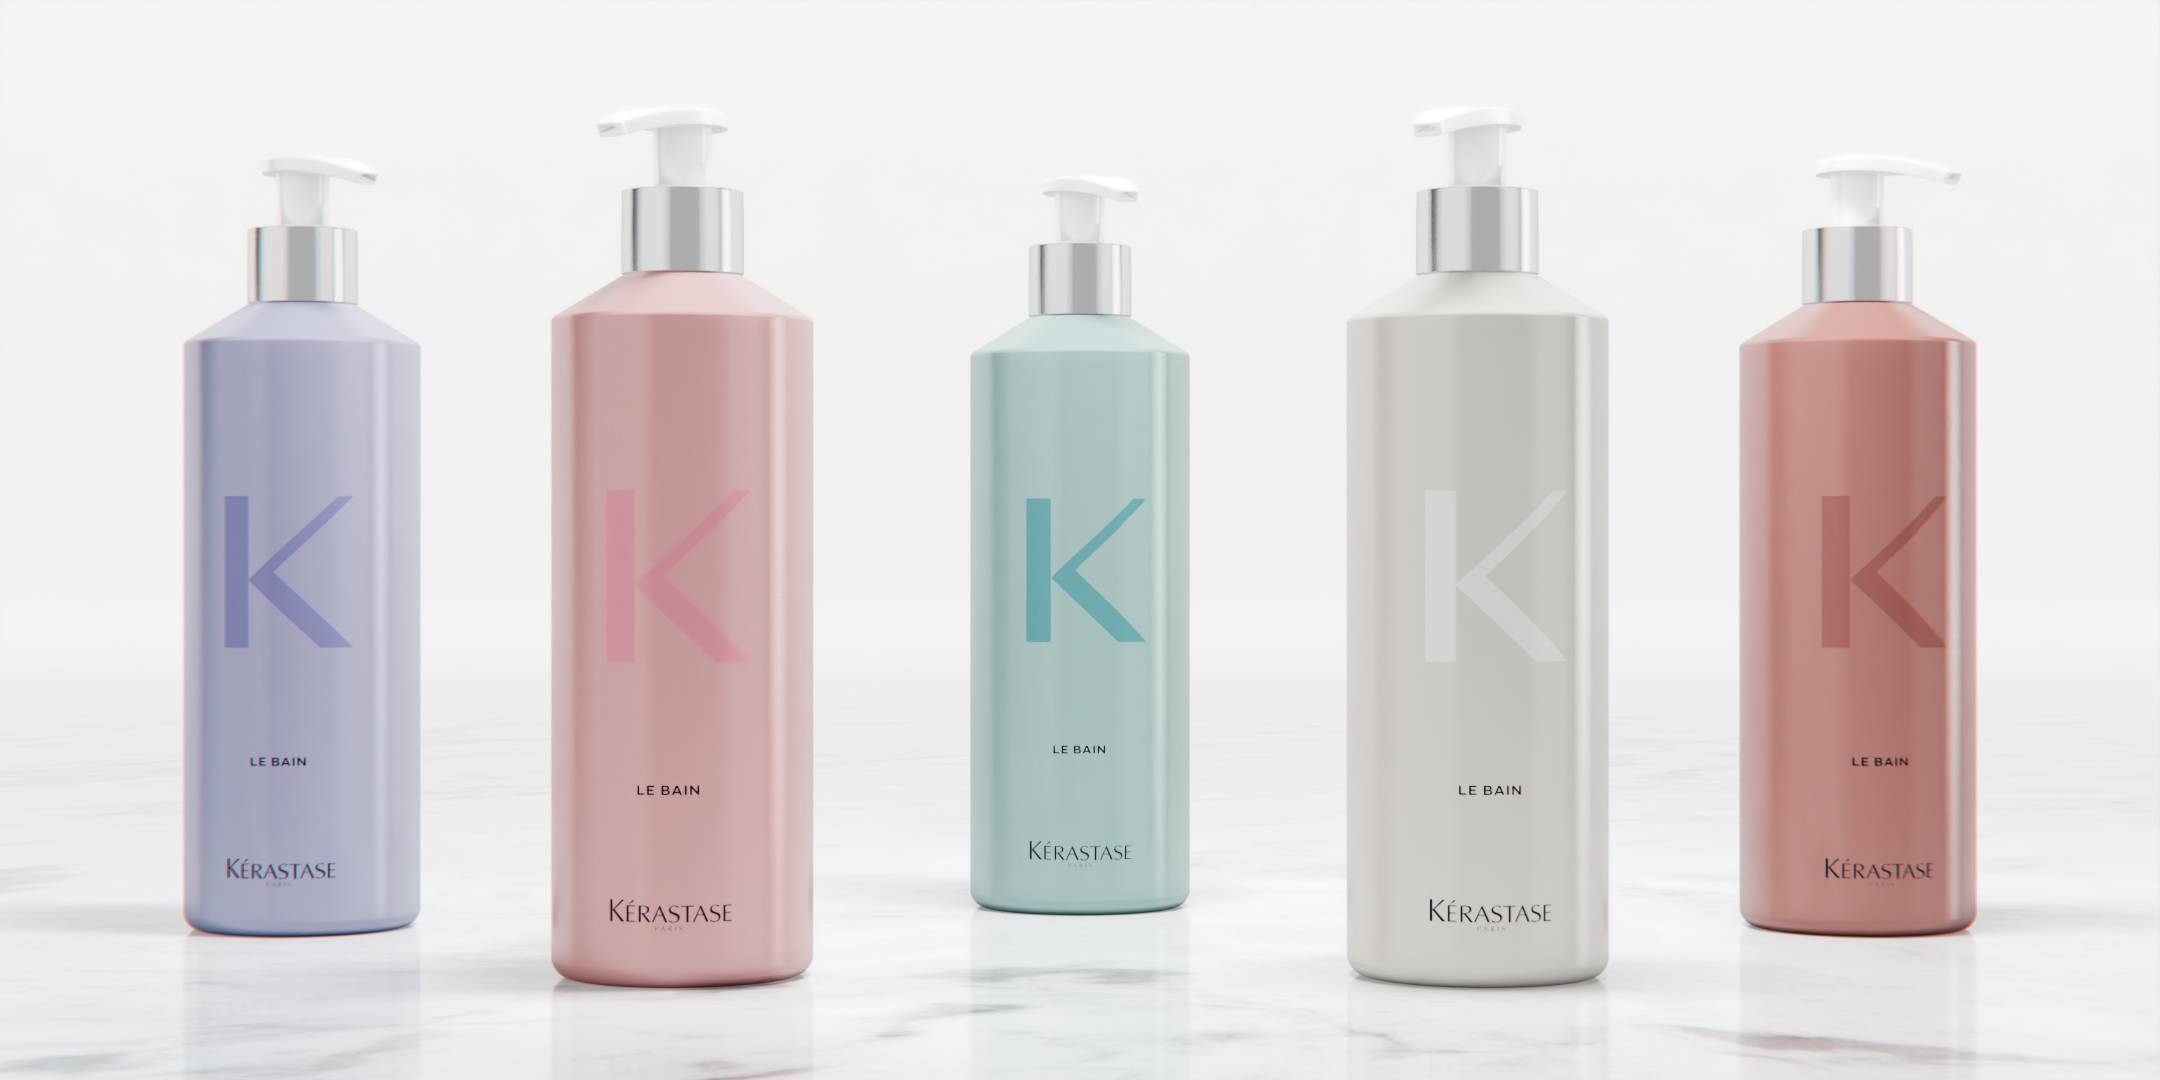 Kerastase Refillable Bottle and Shampoo Refill Pouch